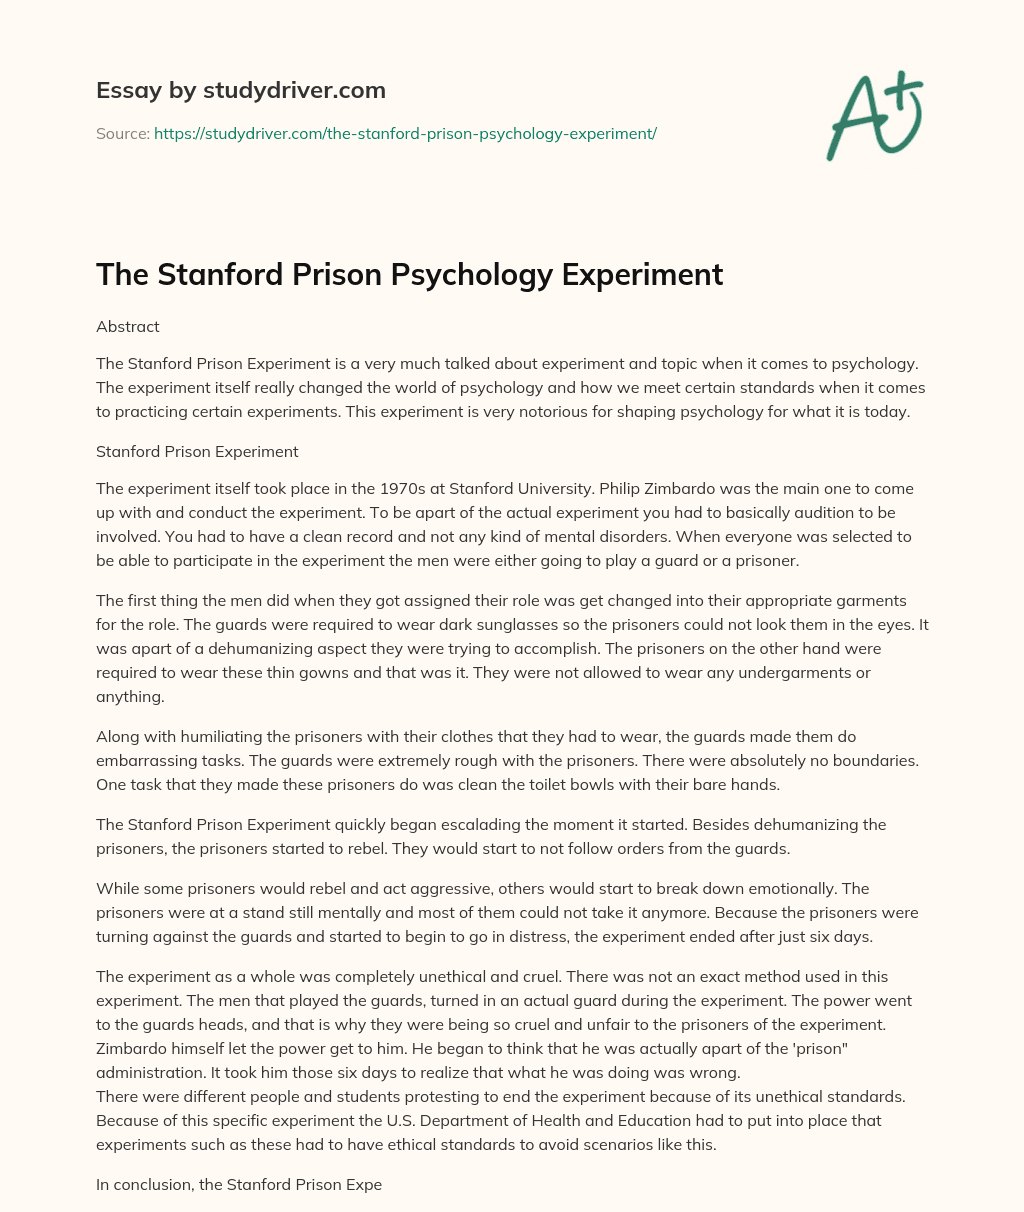 The Stanford Prison Psychology Experiment essay